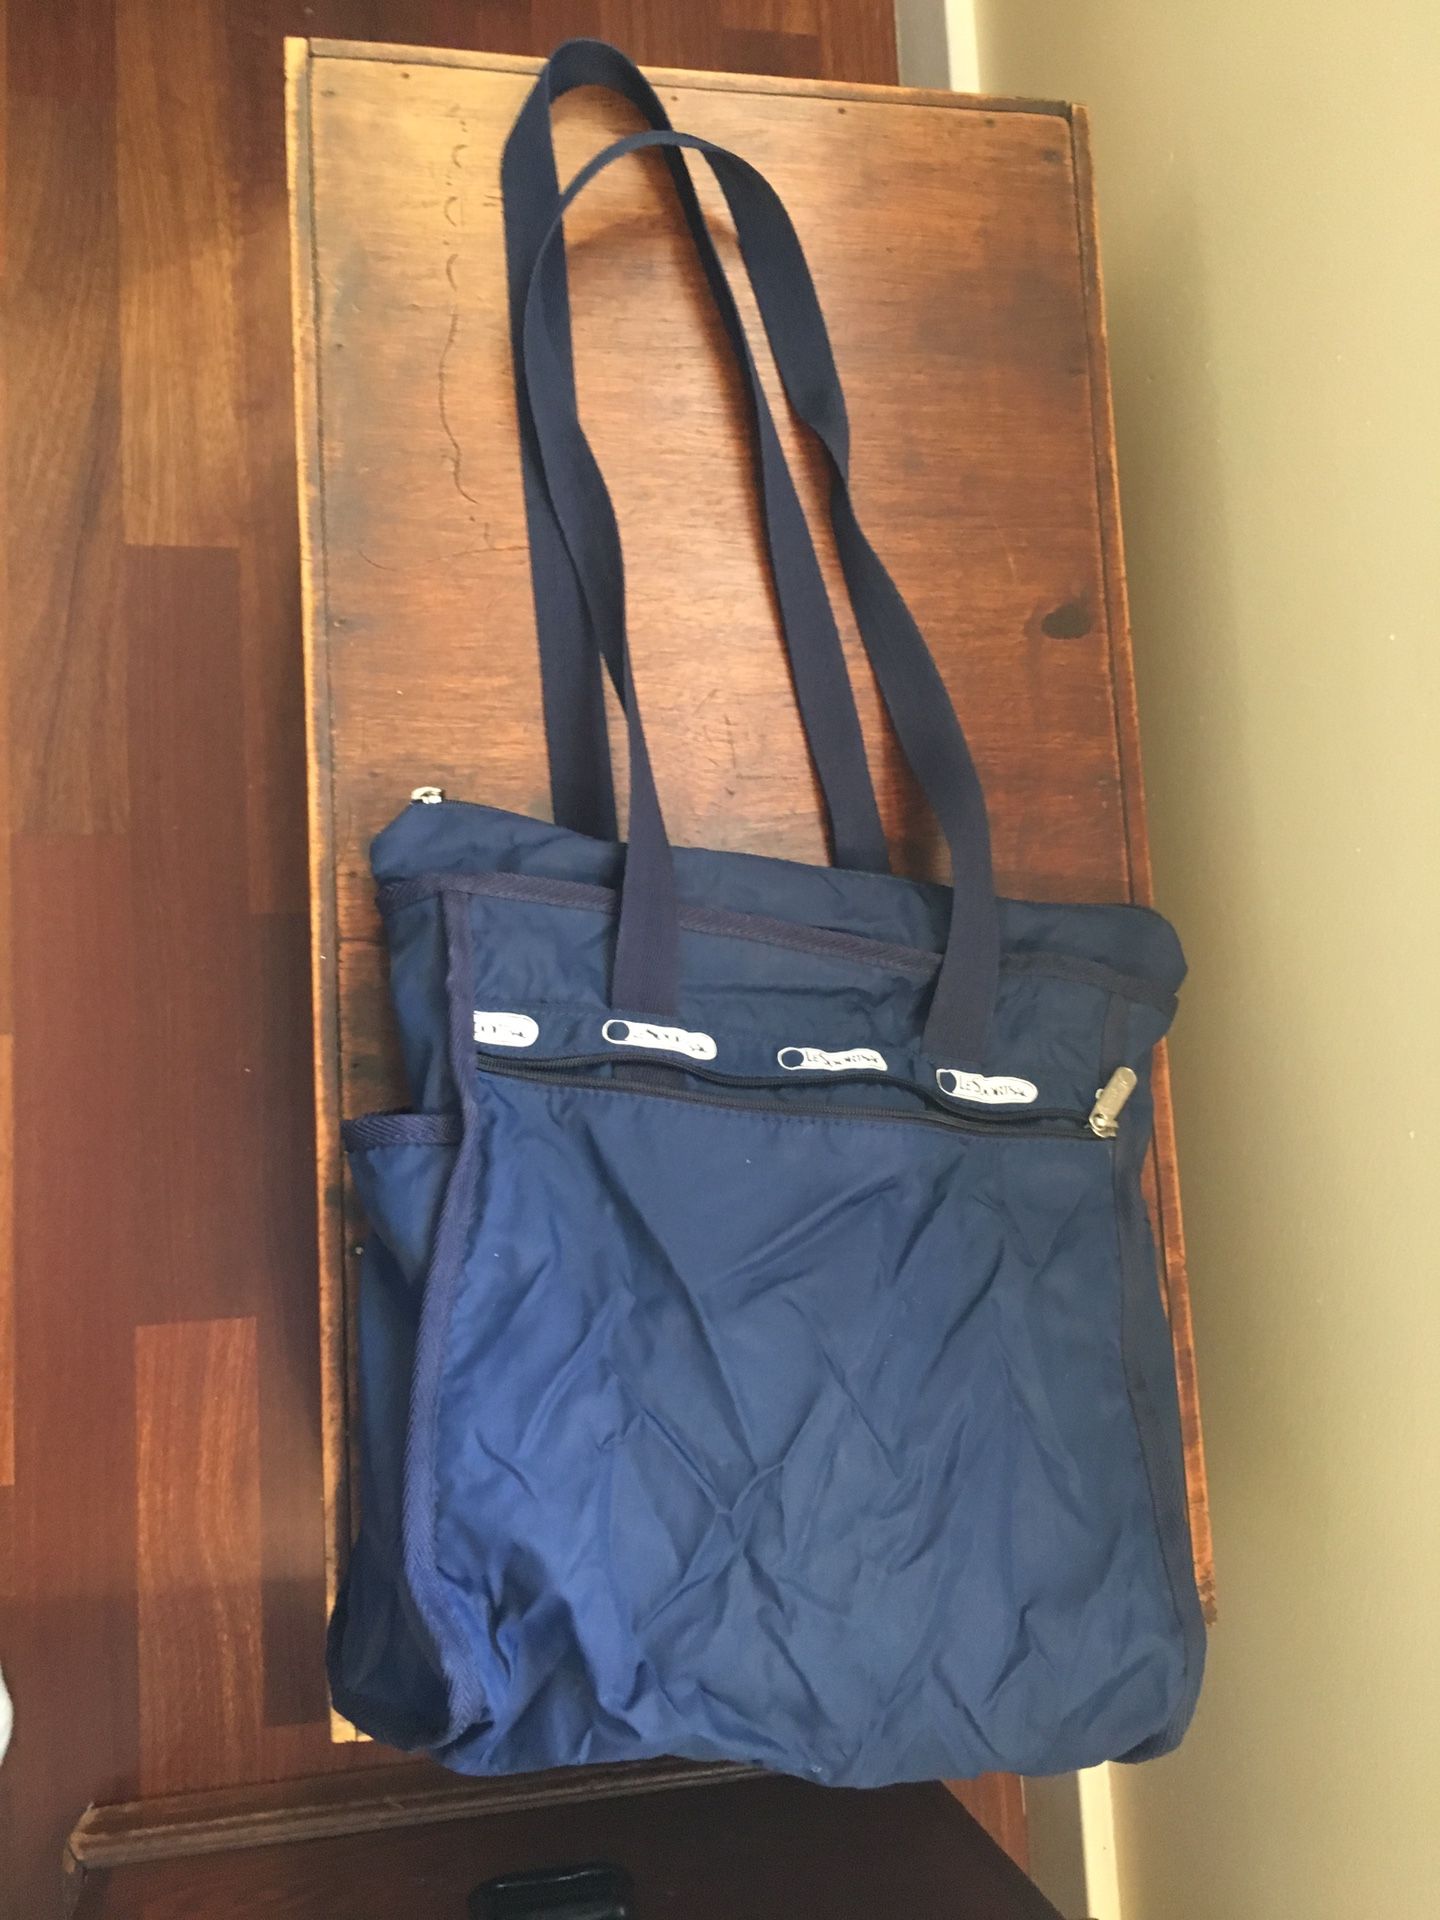 Le Sport Sac Navy Small Carry-on Style Bag